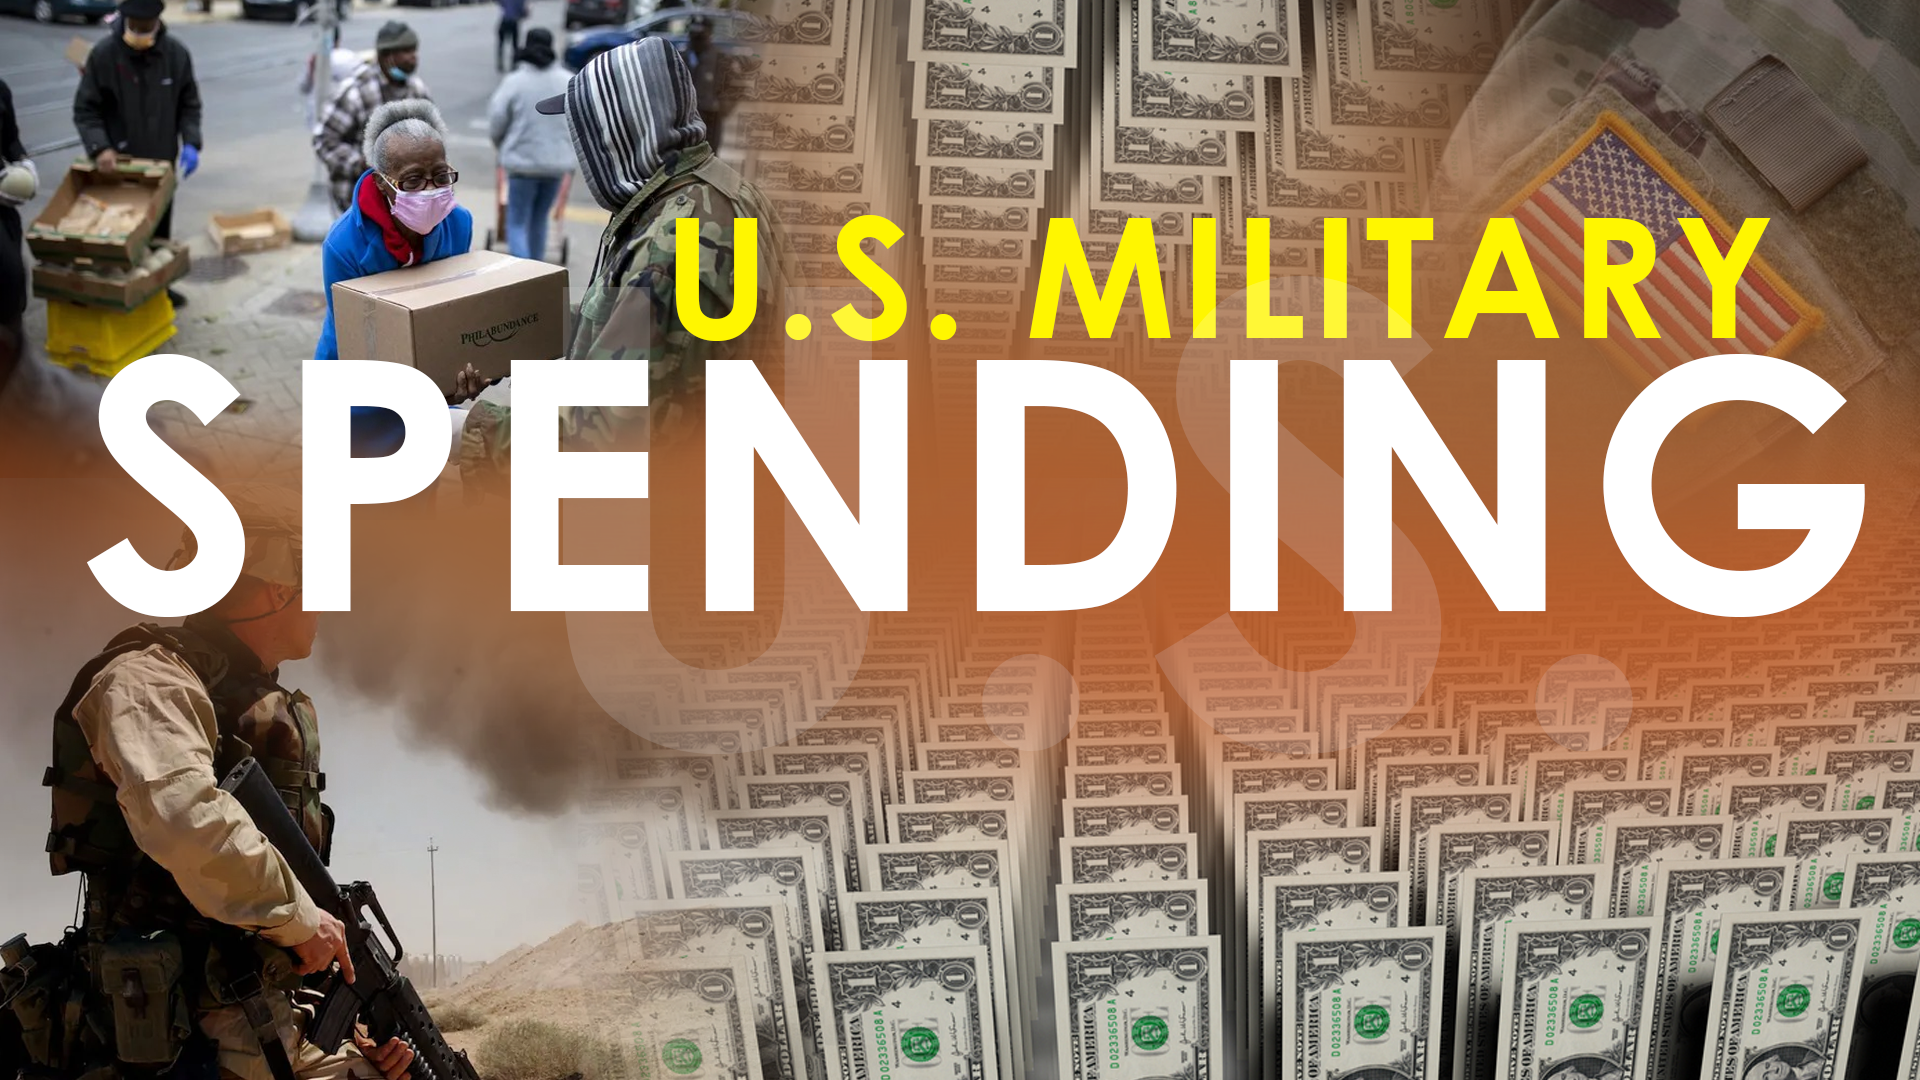 US military spending: Wars over the American people